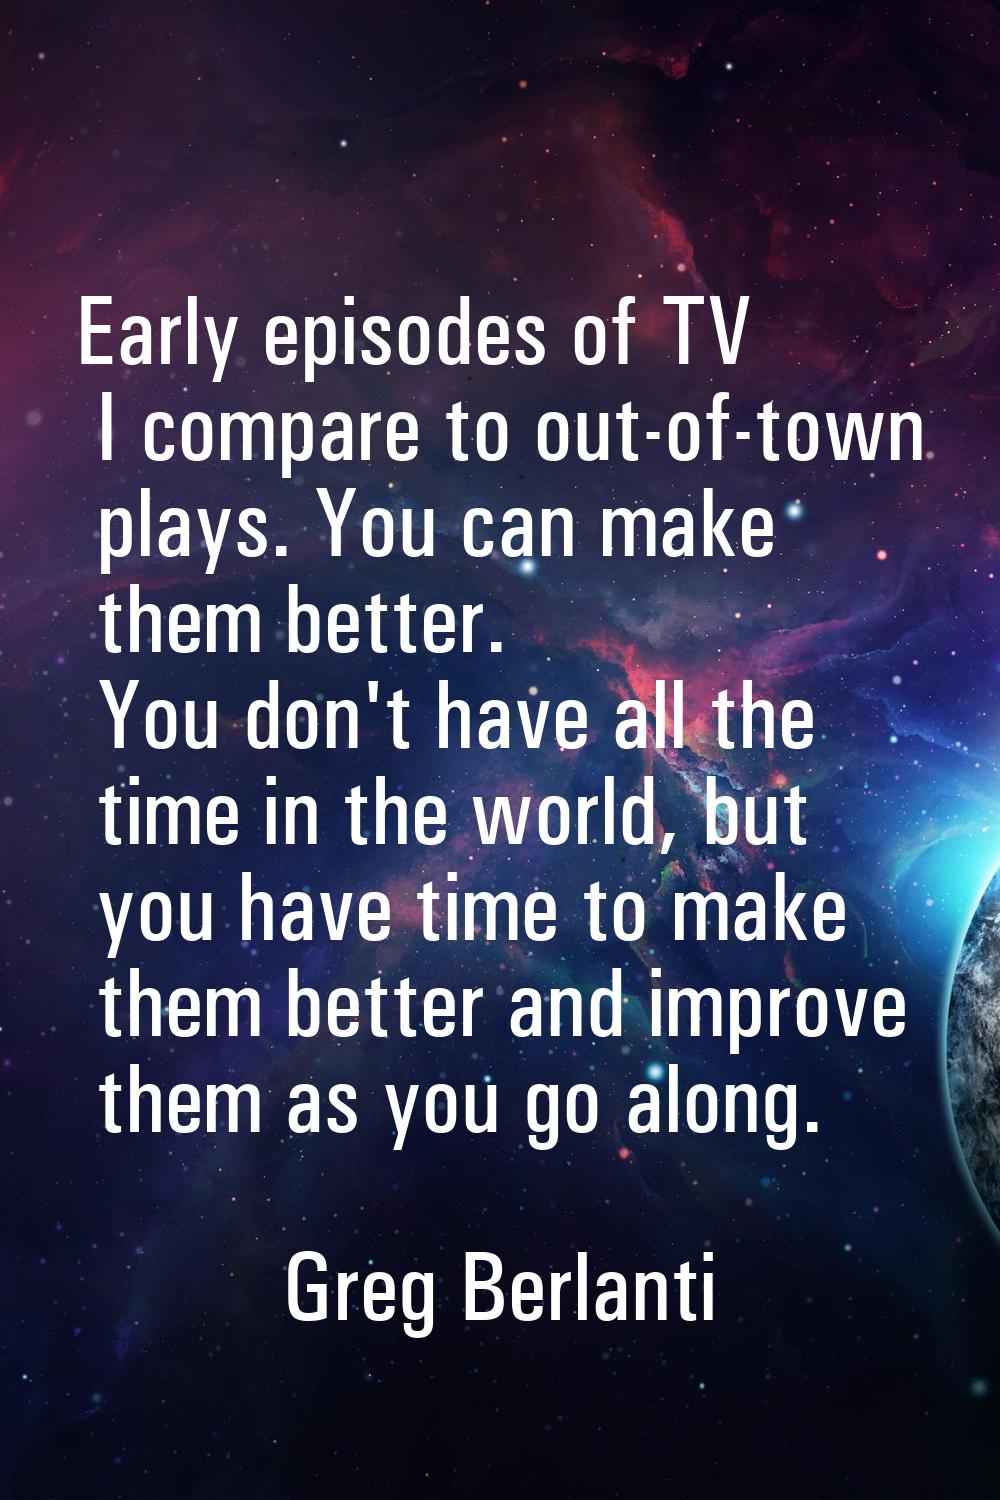 Early episodes of TV I compare to out-of-town plays. You can make them better. You don't have all t